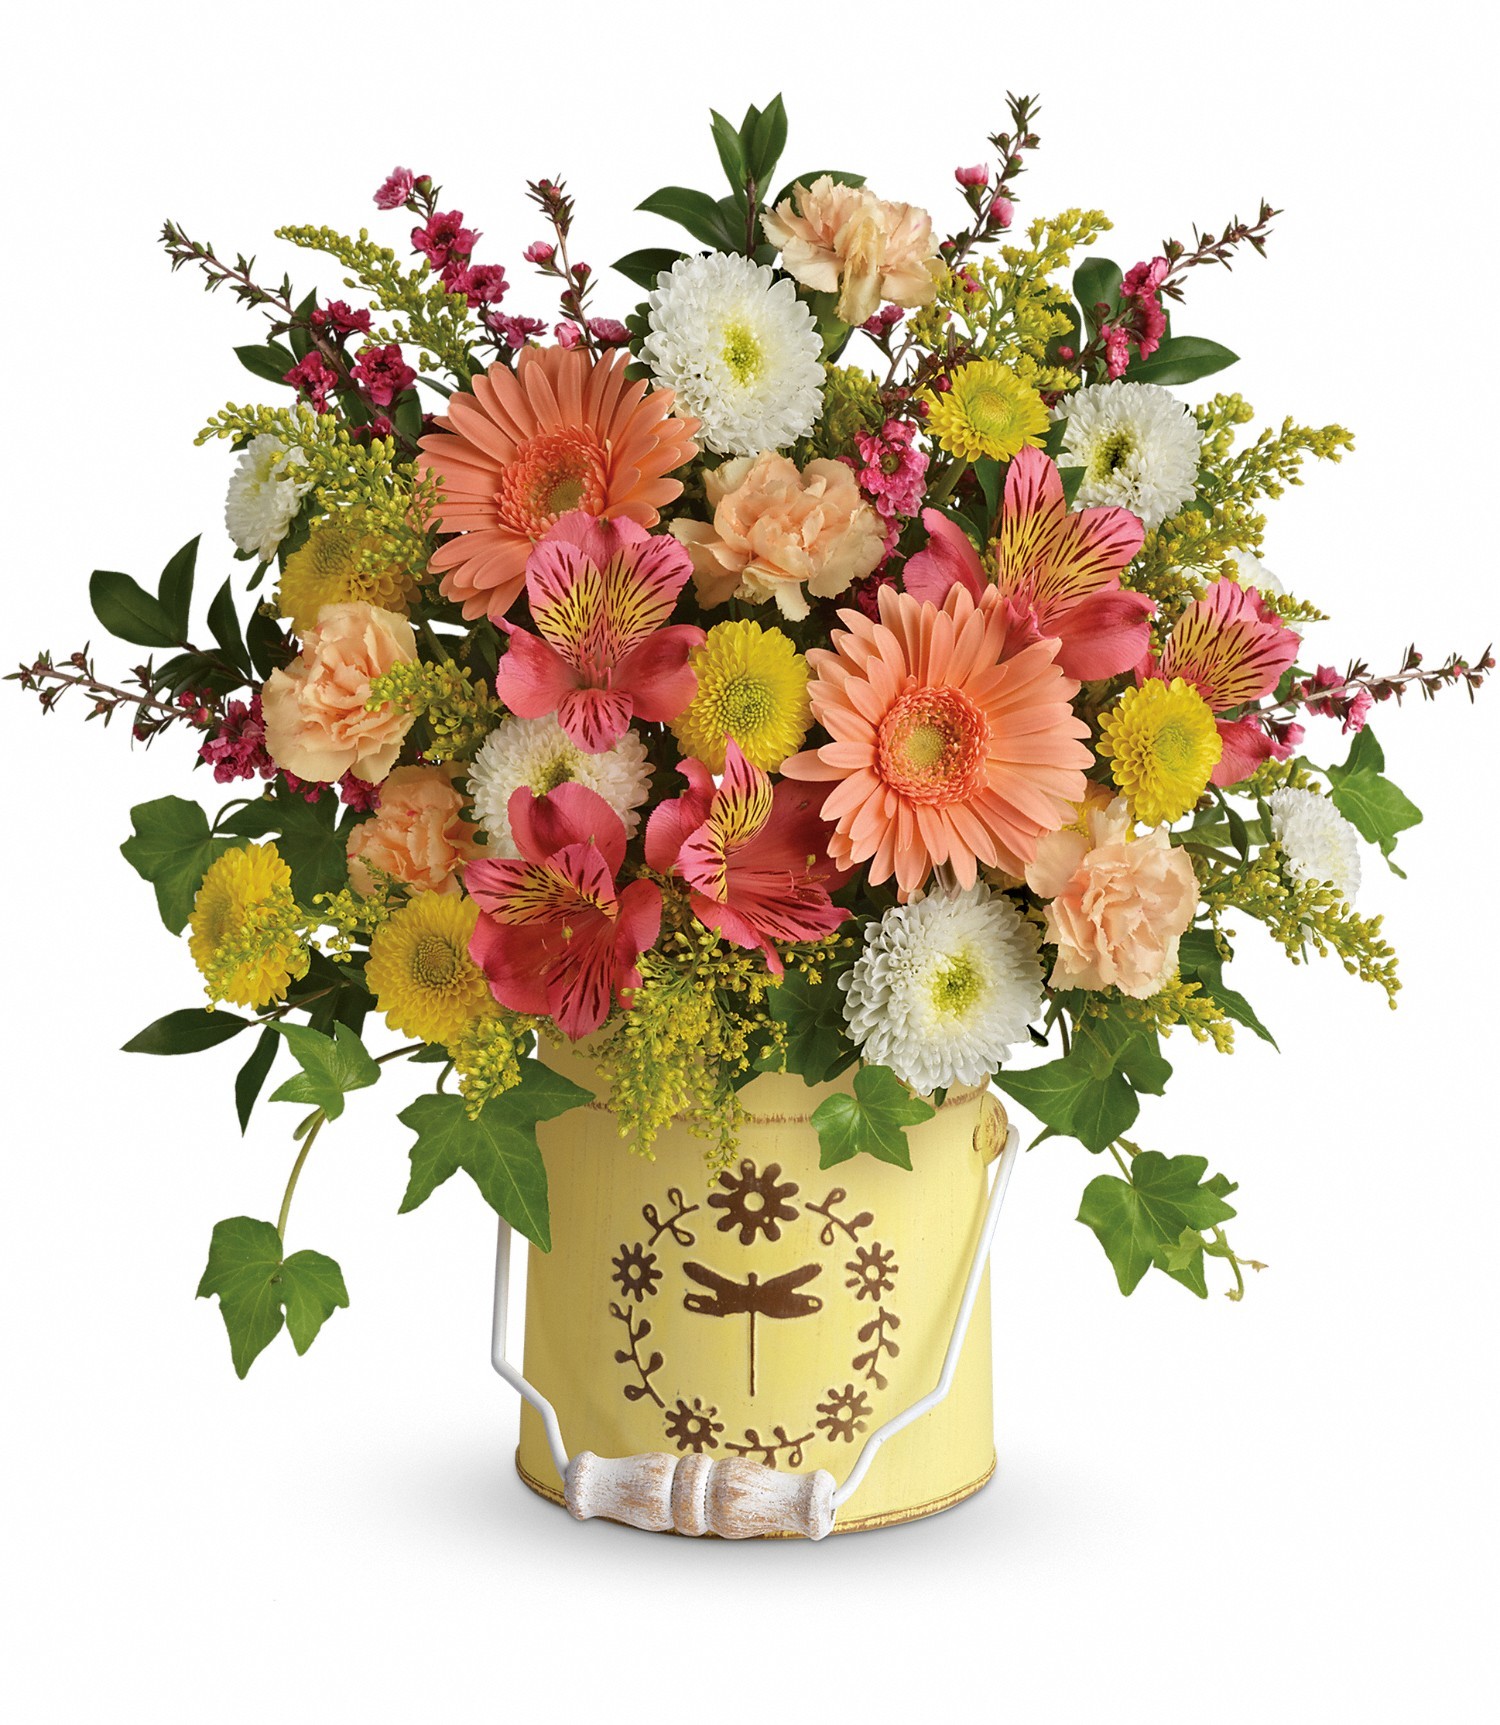 Teleflora's Country Spring Bouquet in Clairton, PA | Jim's Flower Shop